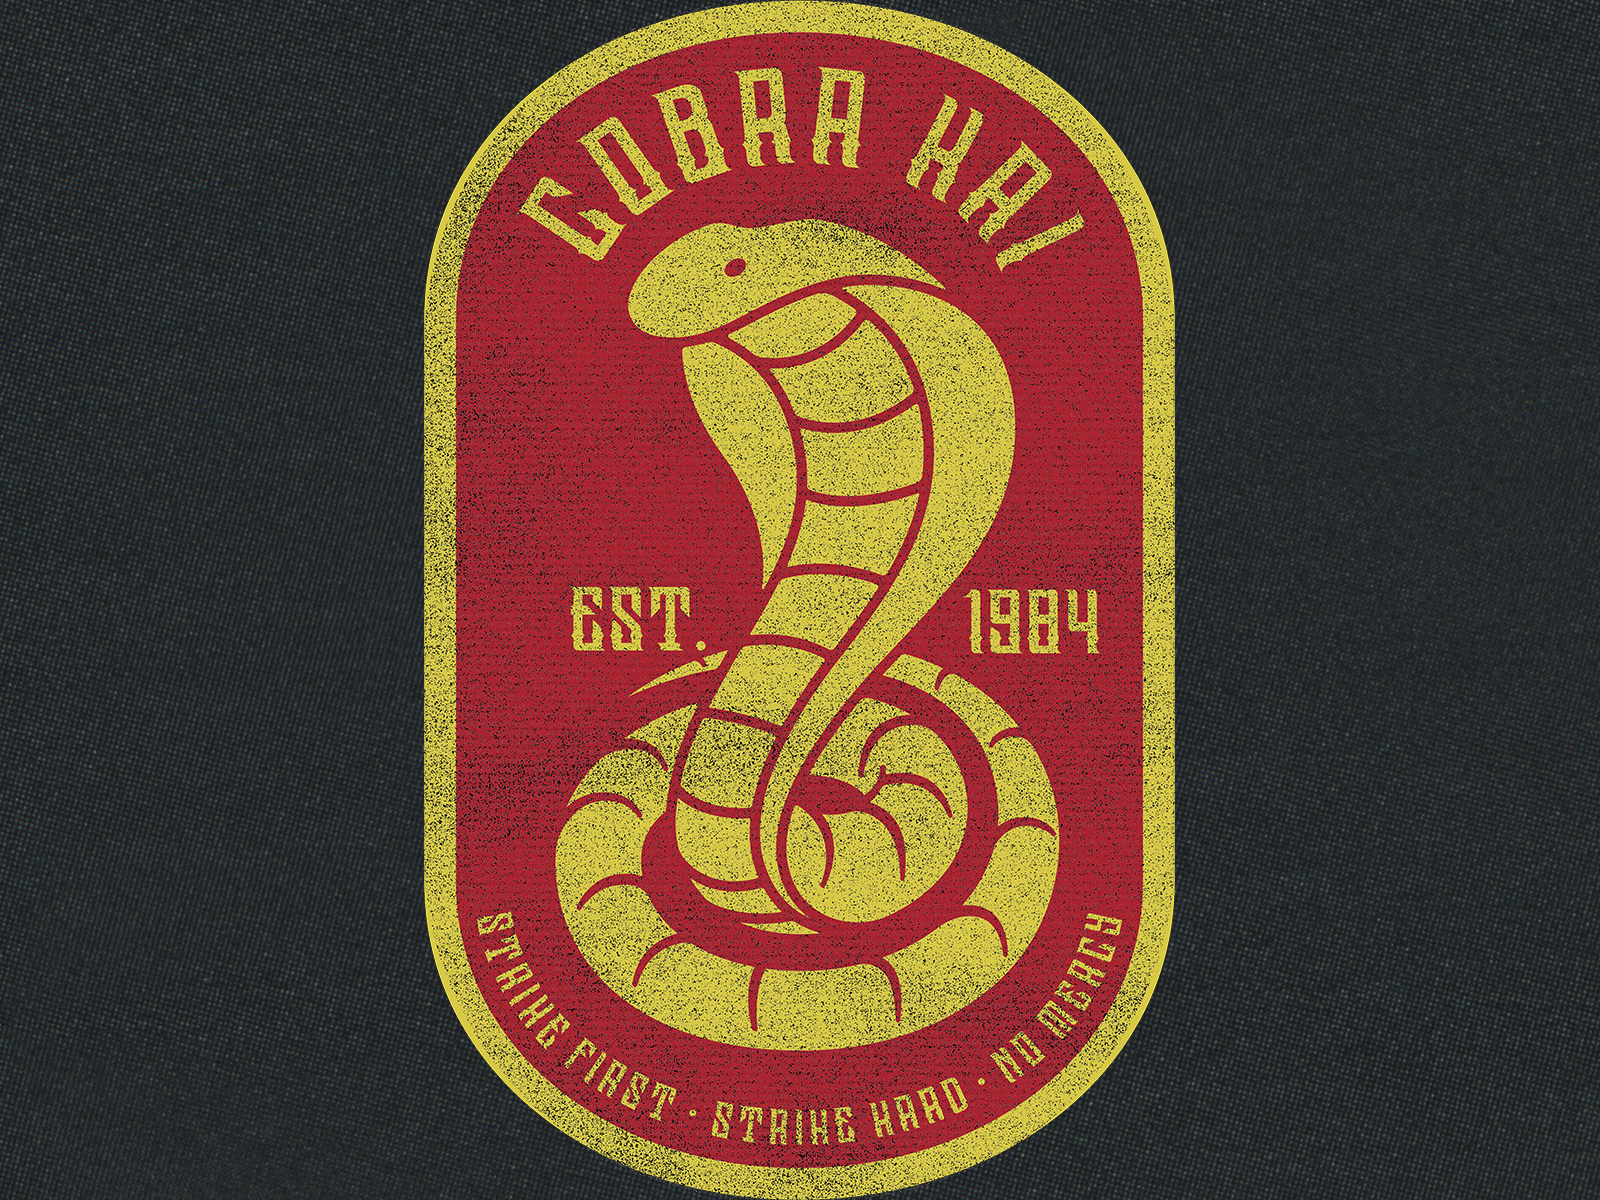 Cobra Kai 2020 by Justin Seeley on Dribbble.